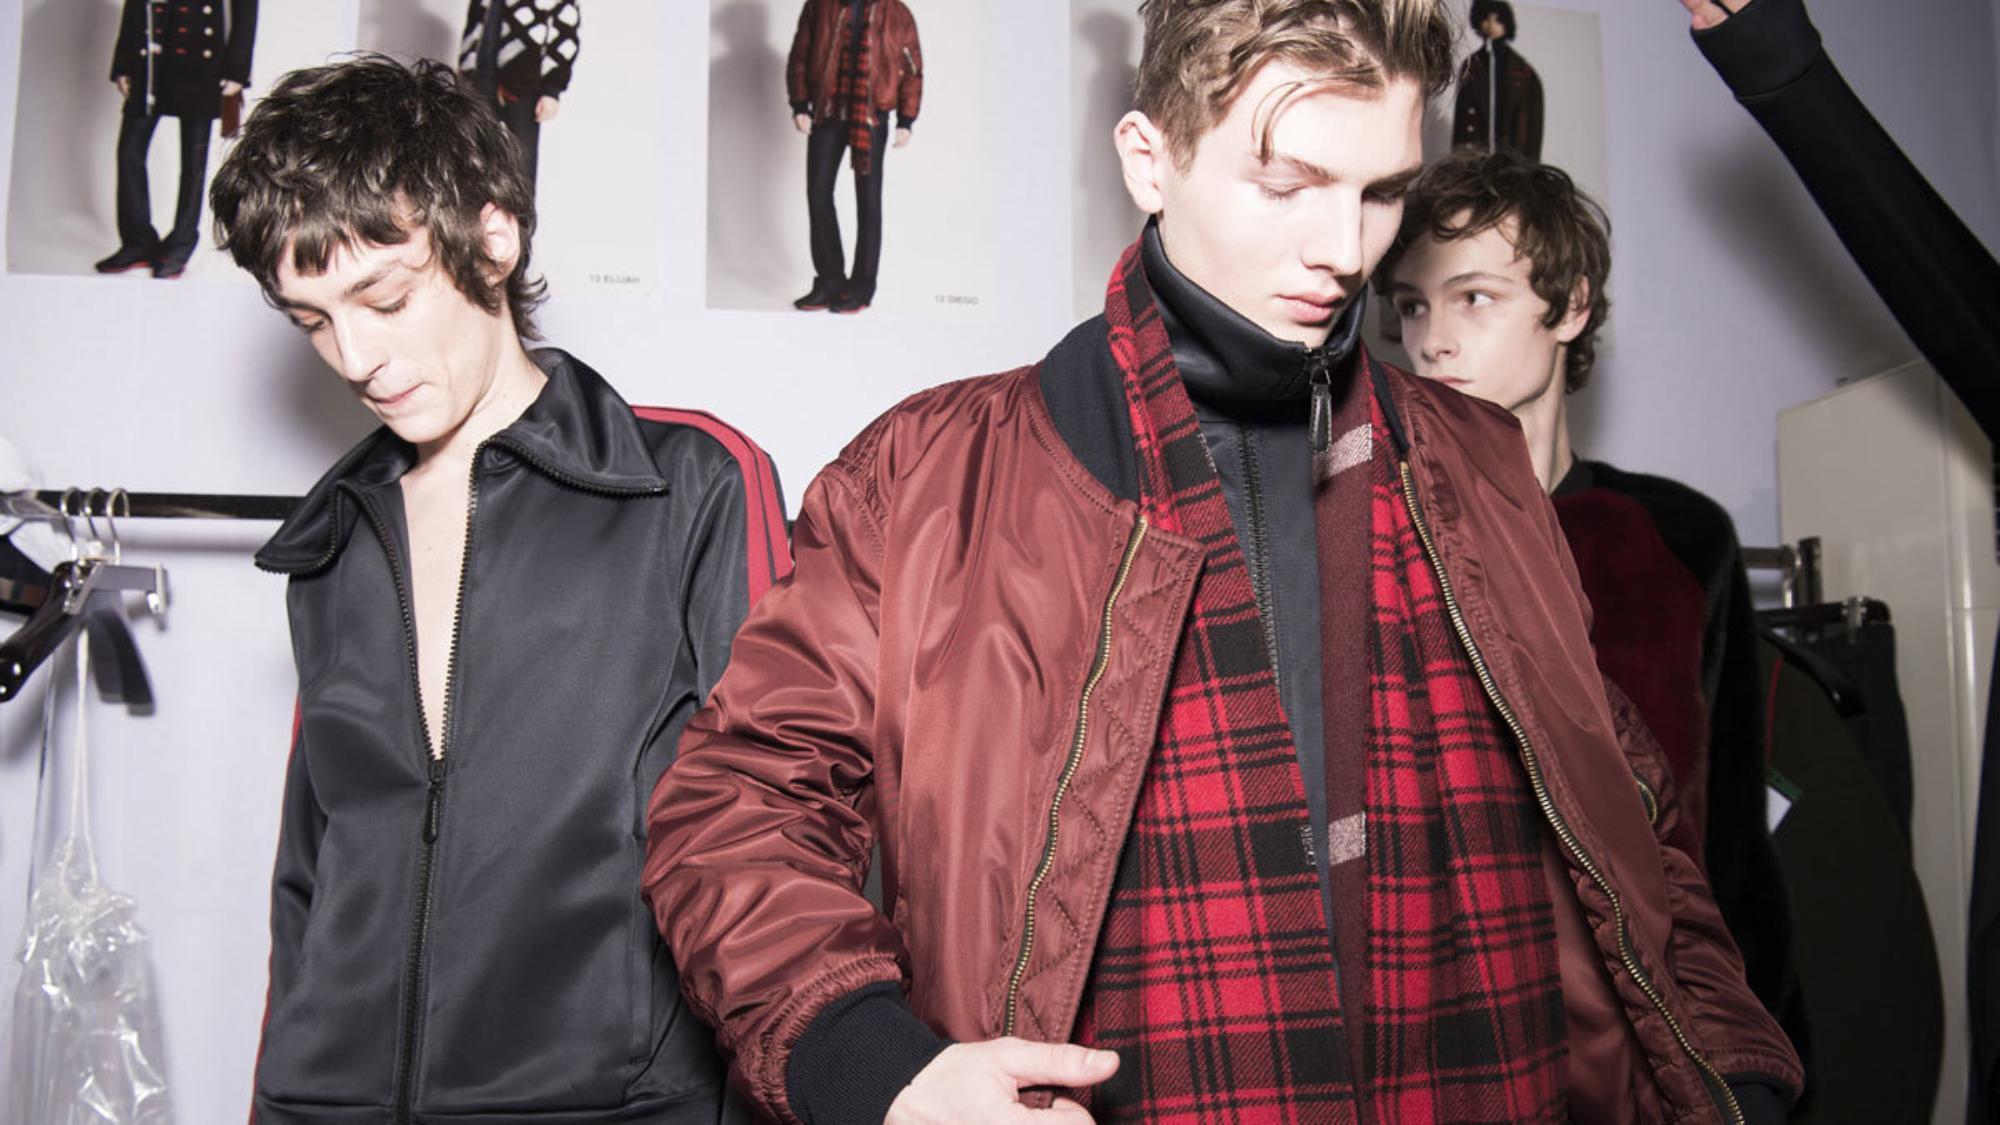 burberry are combining menswear and womenswear into one show | read | i-D